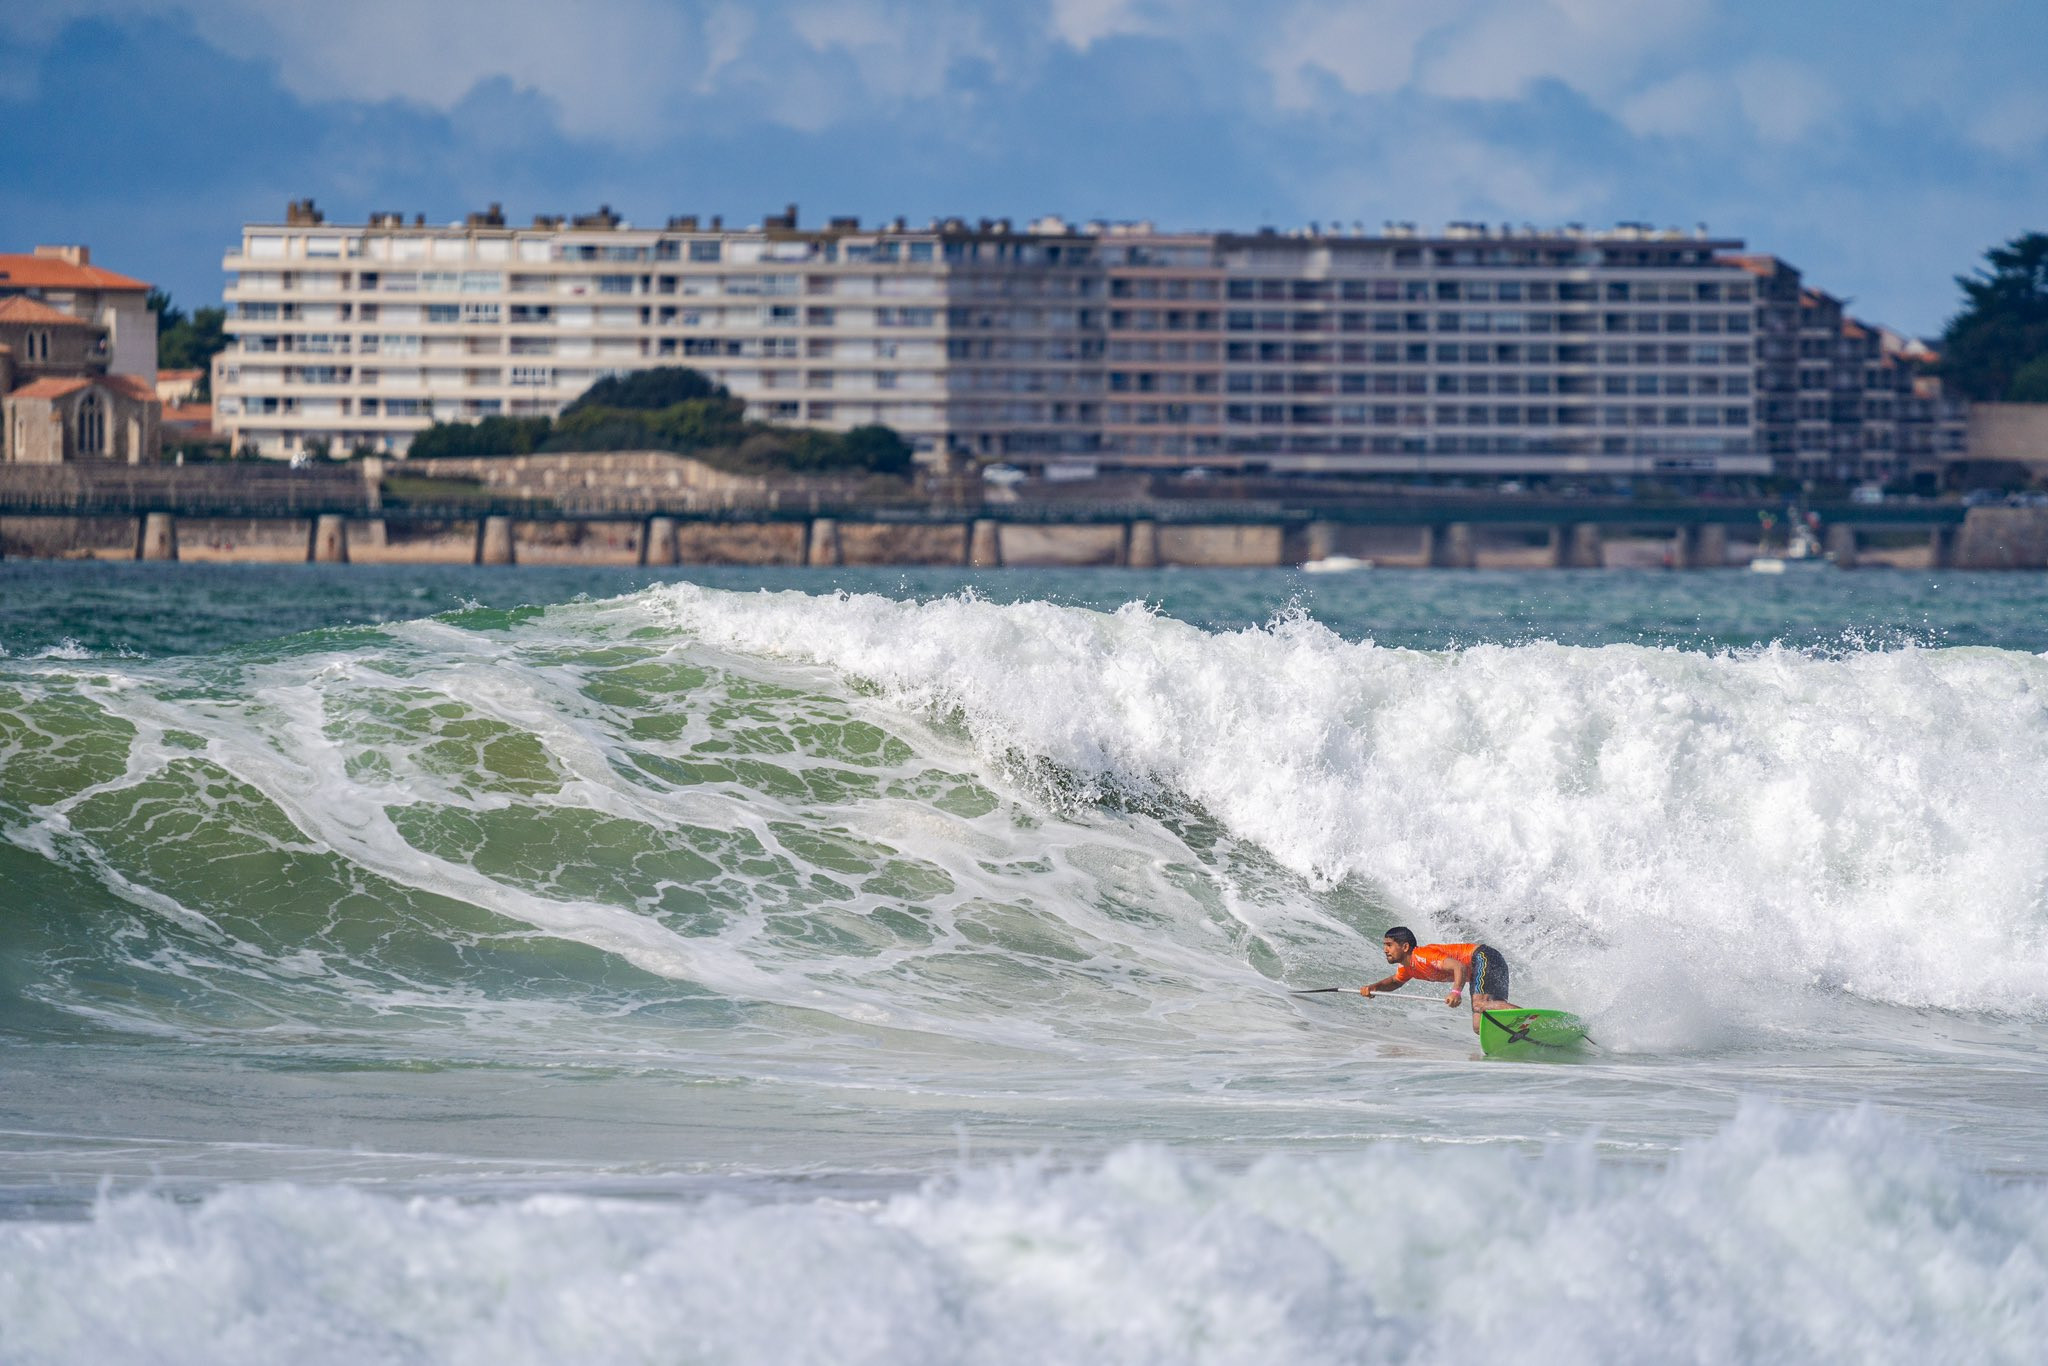 Champions were crowned across stand-up paddle and paddleboard disciplines at Les Sables d'Olonne ©ISA